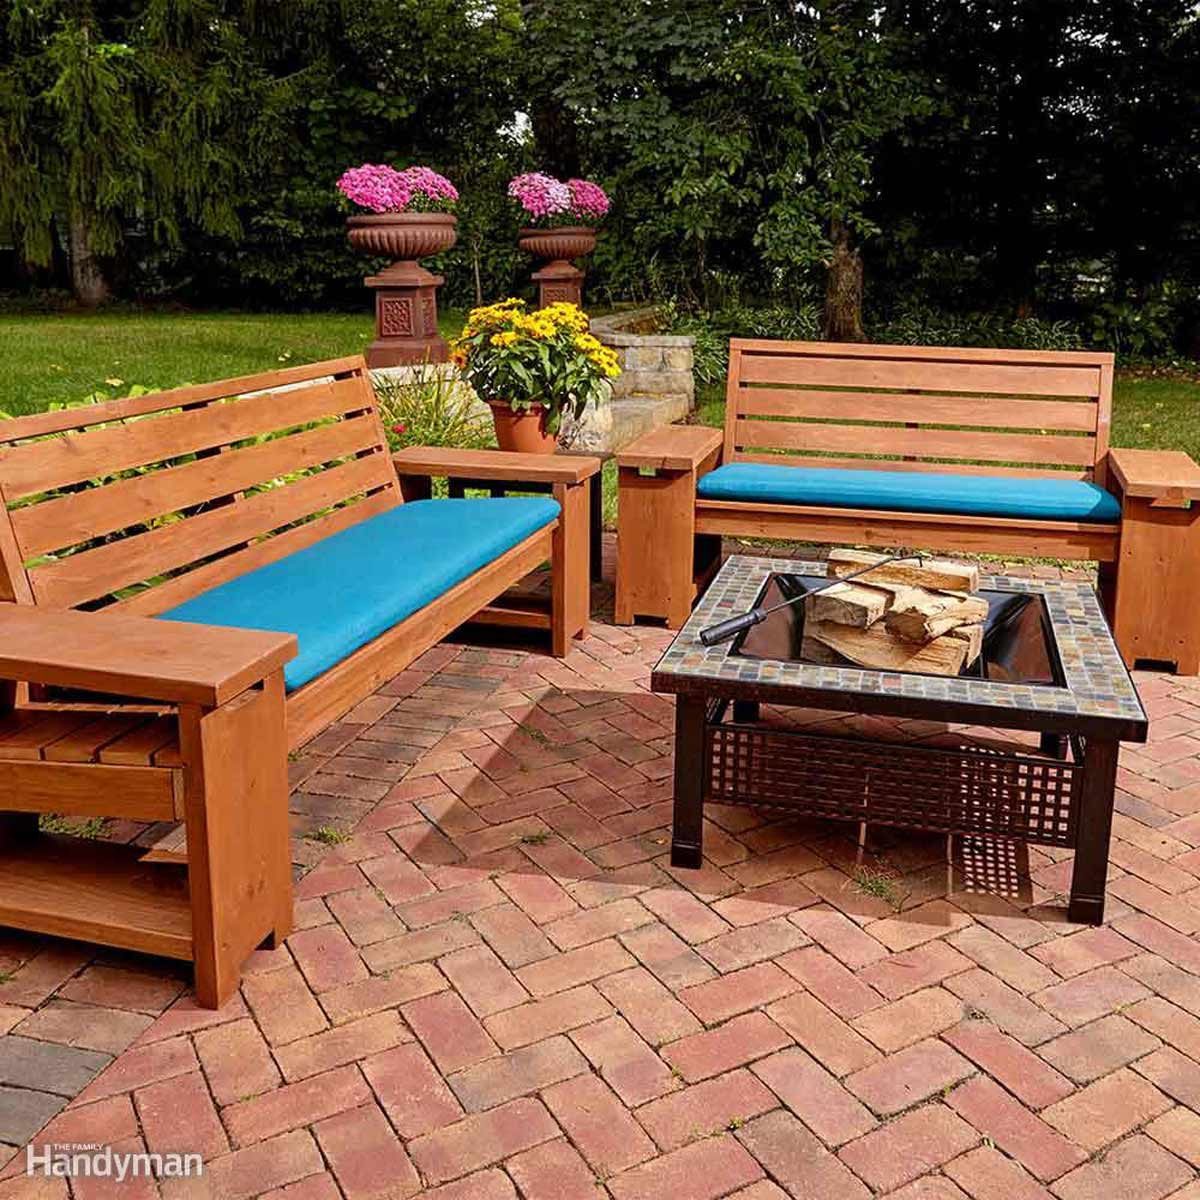 Free DIY Outdoor Furniture Plans
 15 Awesome Plans for DIY Patio Furniture